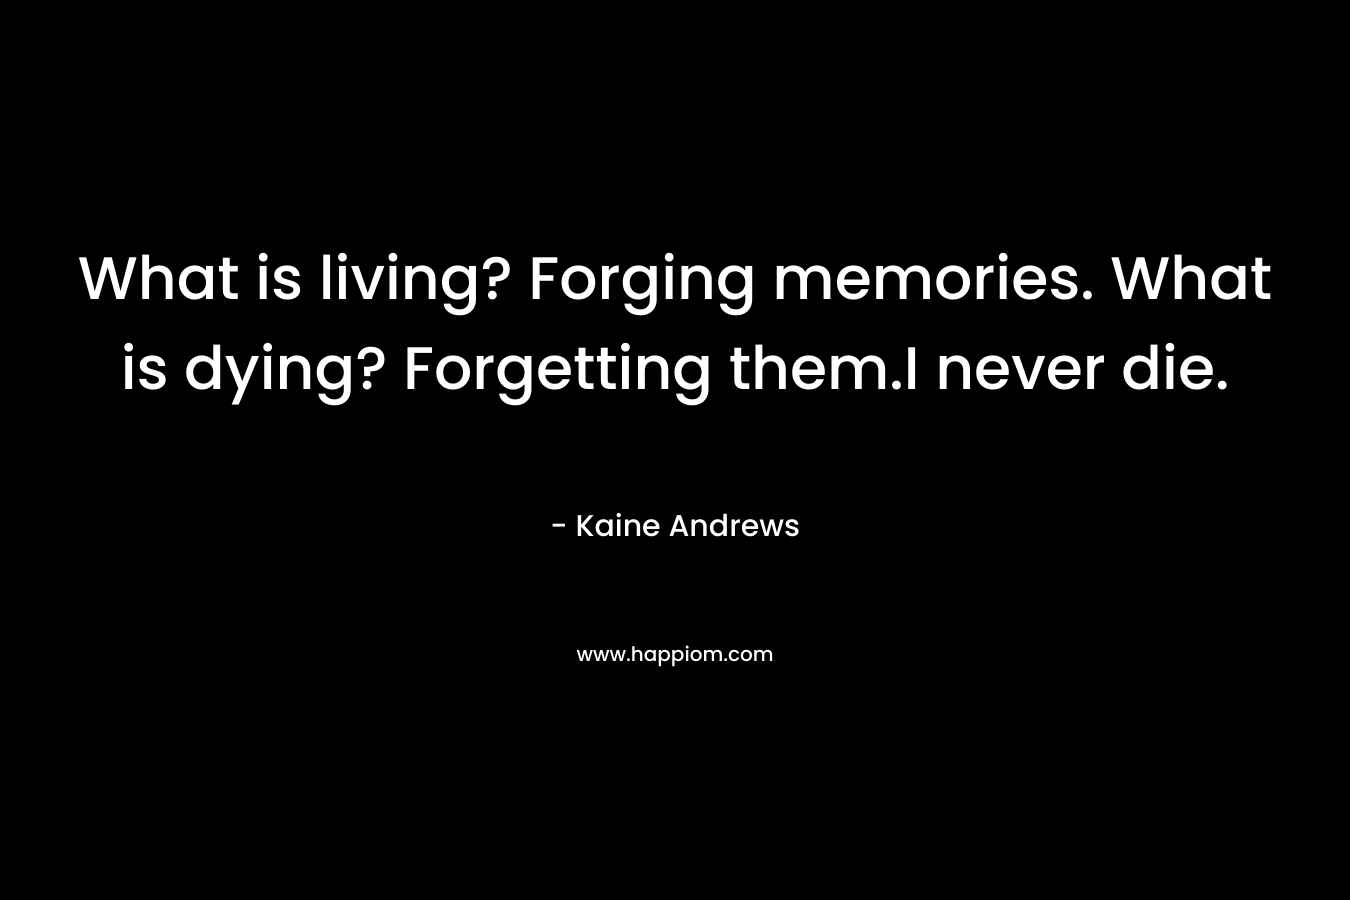 What is living? Forging memories. What is dying? Forgetting them.I never die. – Kaine Andrews